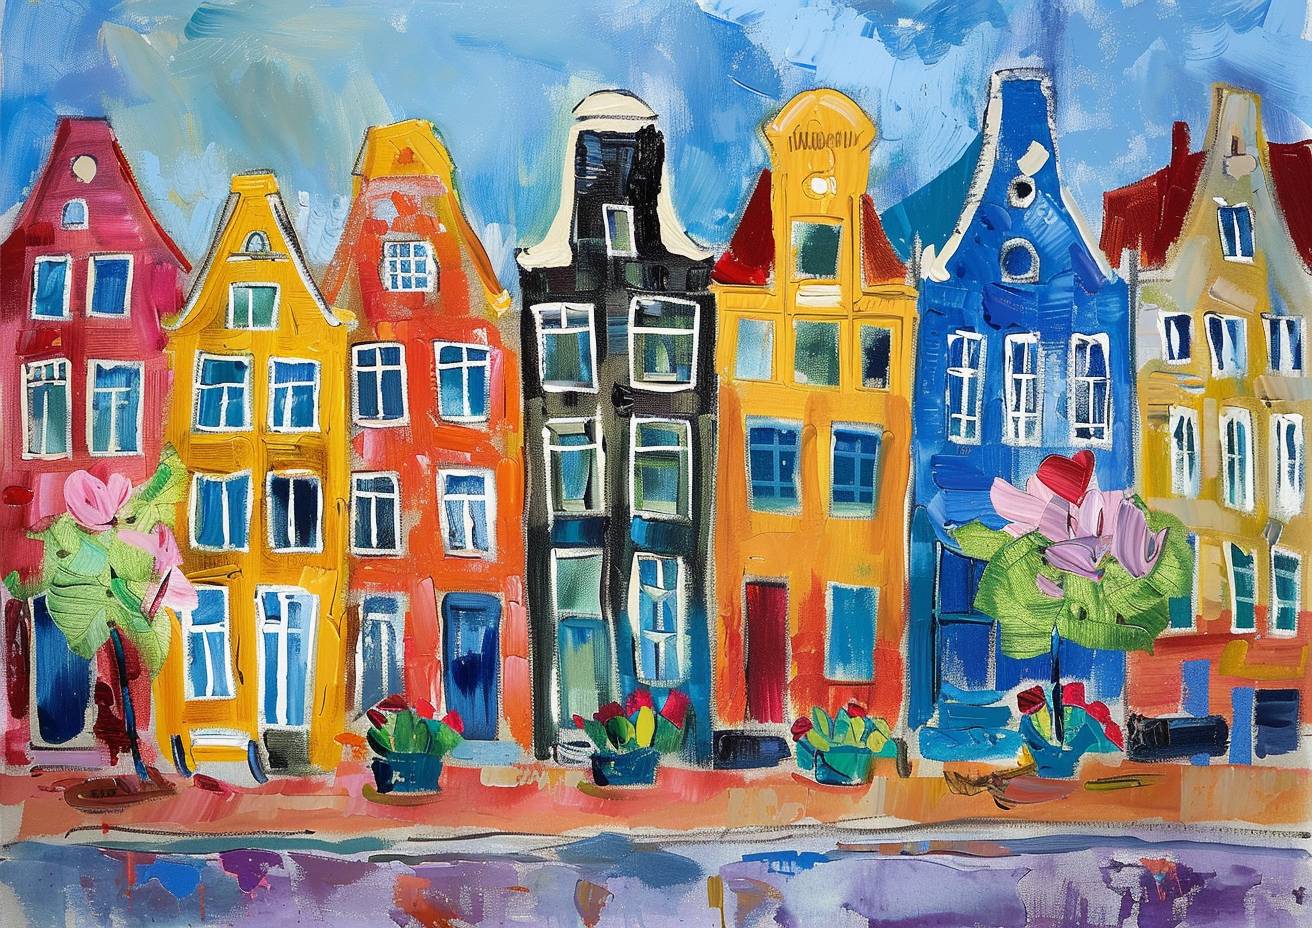 Colorful Shadow Sketch, Amsterdam, charming street lined with colorful townhouses, flowers, summertime, England, most unique naive art amazing painting by Sophie Blackall and Maud Lewis and Chagall, amazing brushstrokes, sharp, high quality, masterpiece, ultrasharp